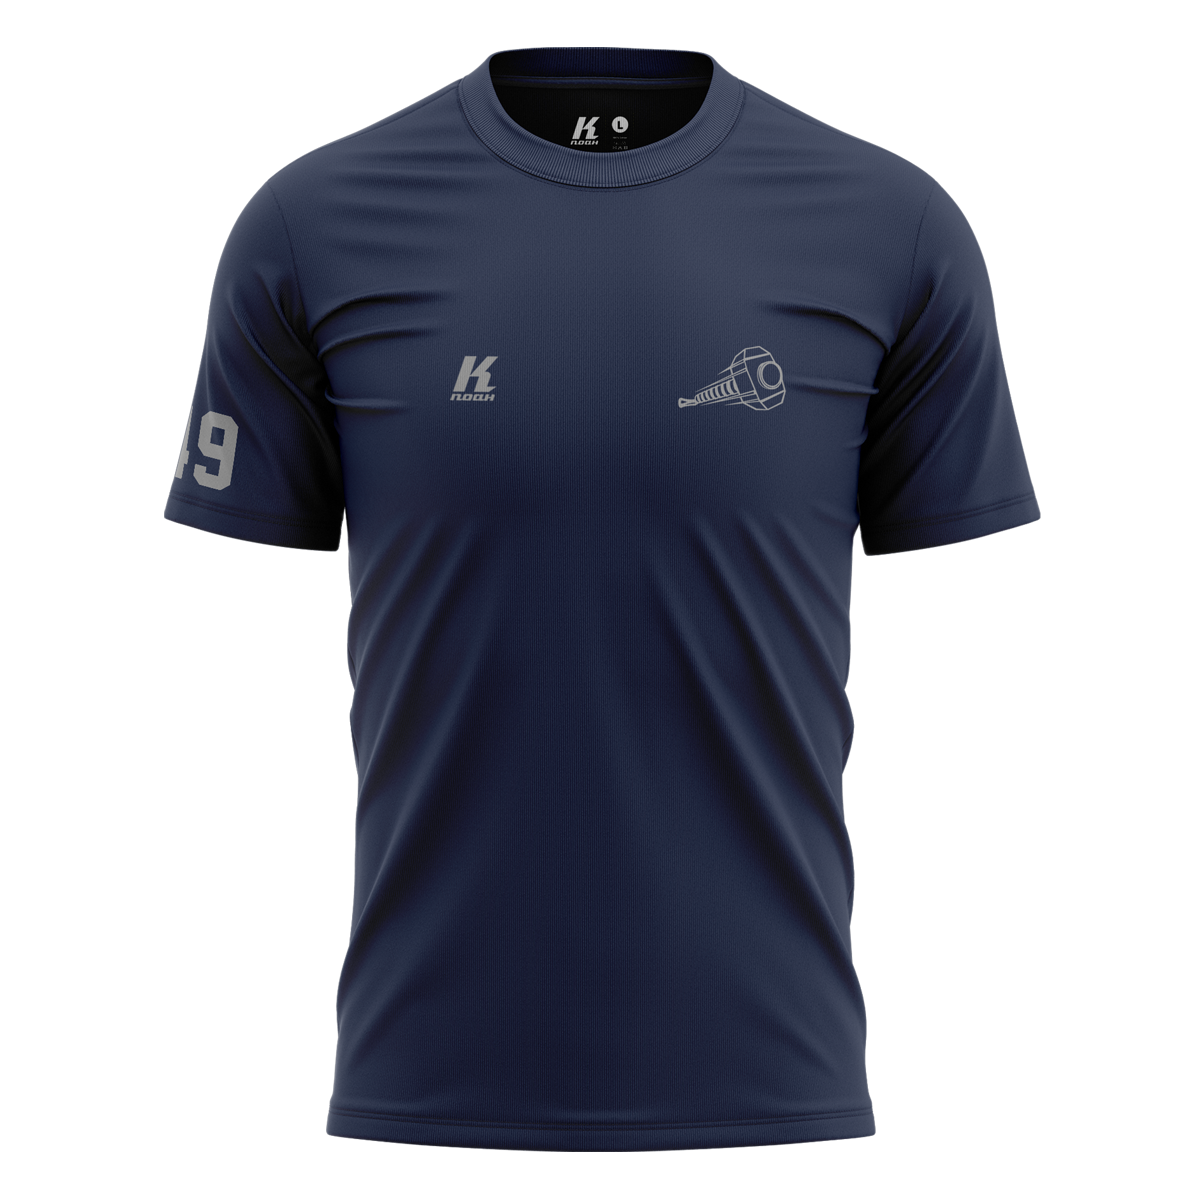 Hammers Primary Basic Tee navy with Playernumber/Initials